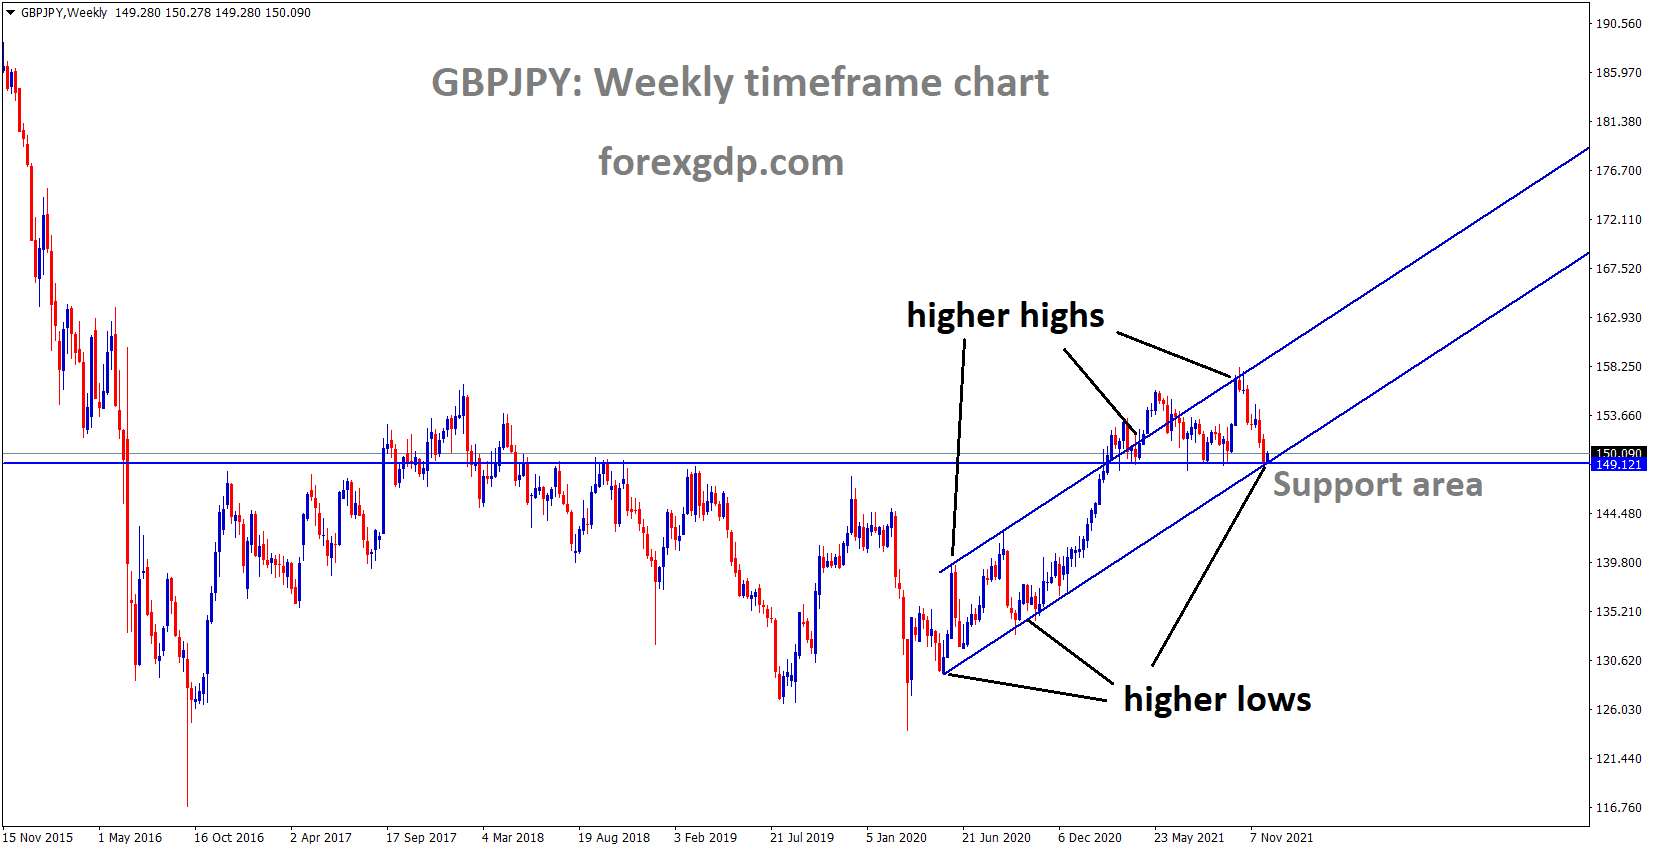 GBPJPY is moving in an Ascending channel and the market has reached the higher low area and horizontal support area of the channel